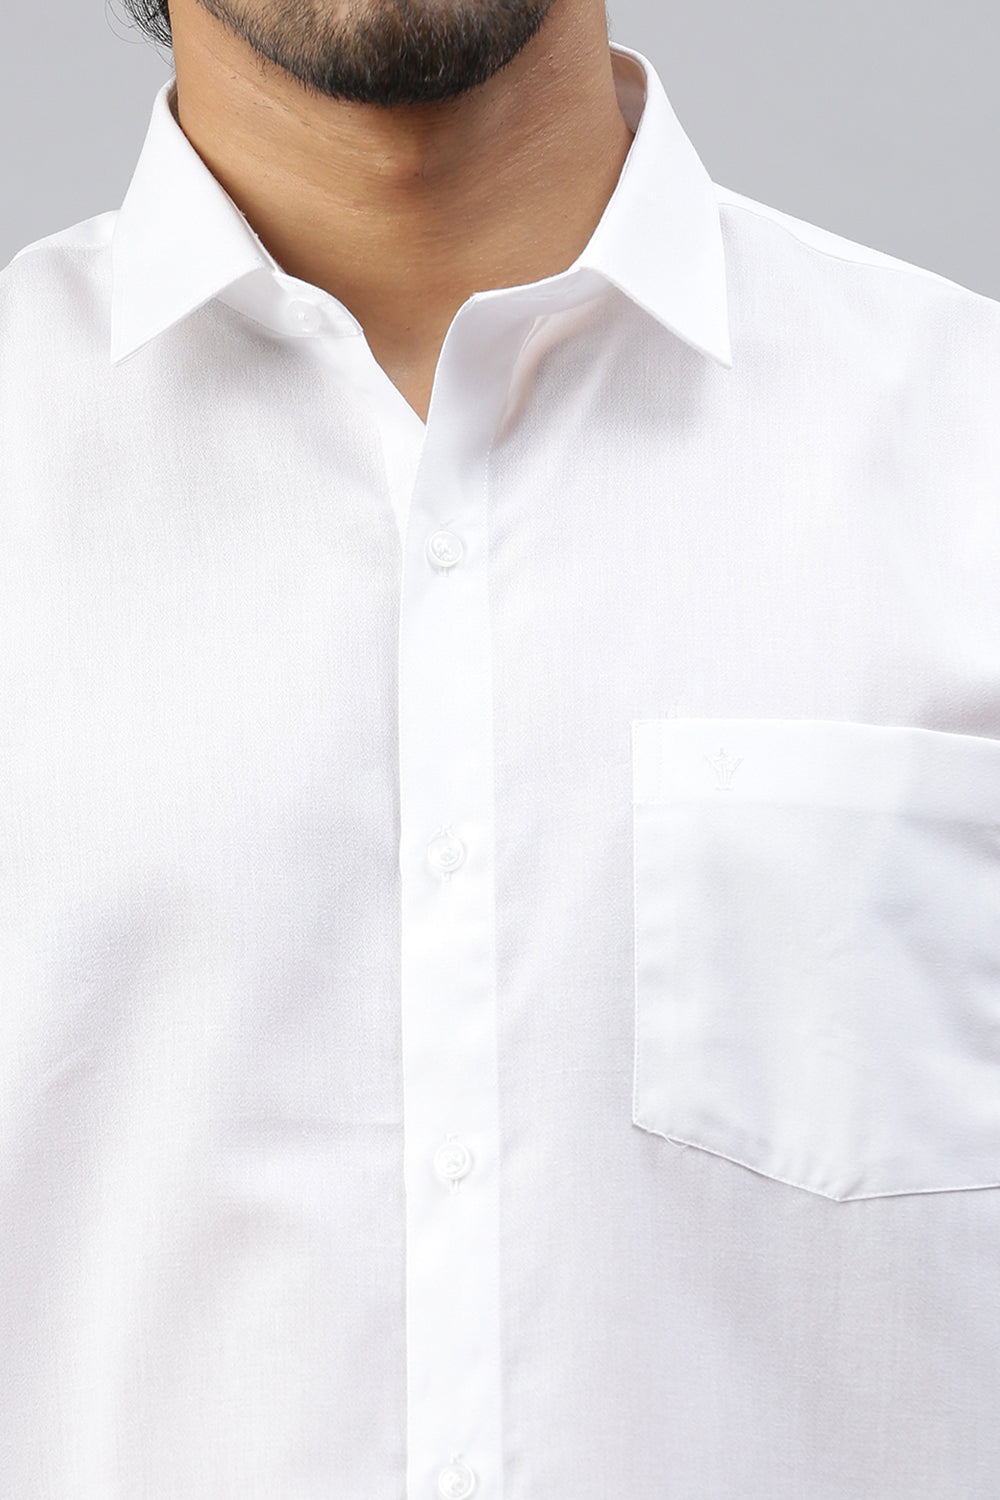 Mens 100% Cotton Full Sleeves White Shirt Justice White-Zoom view